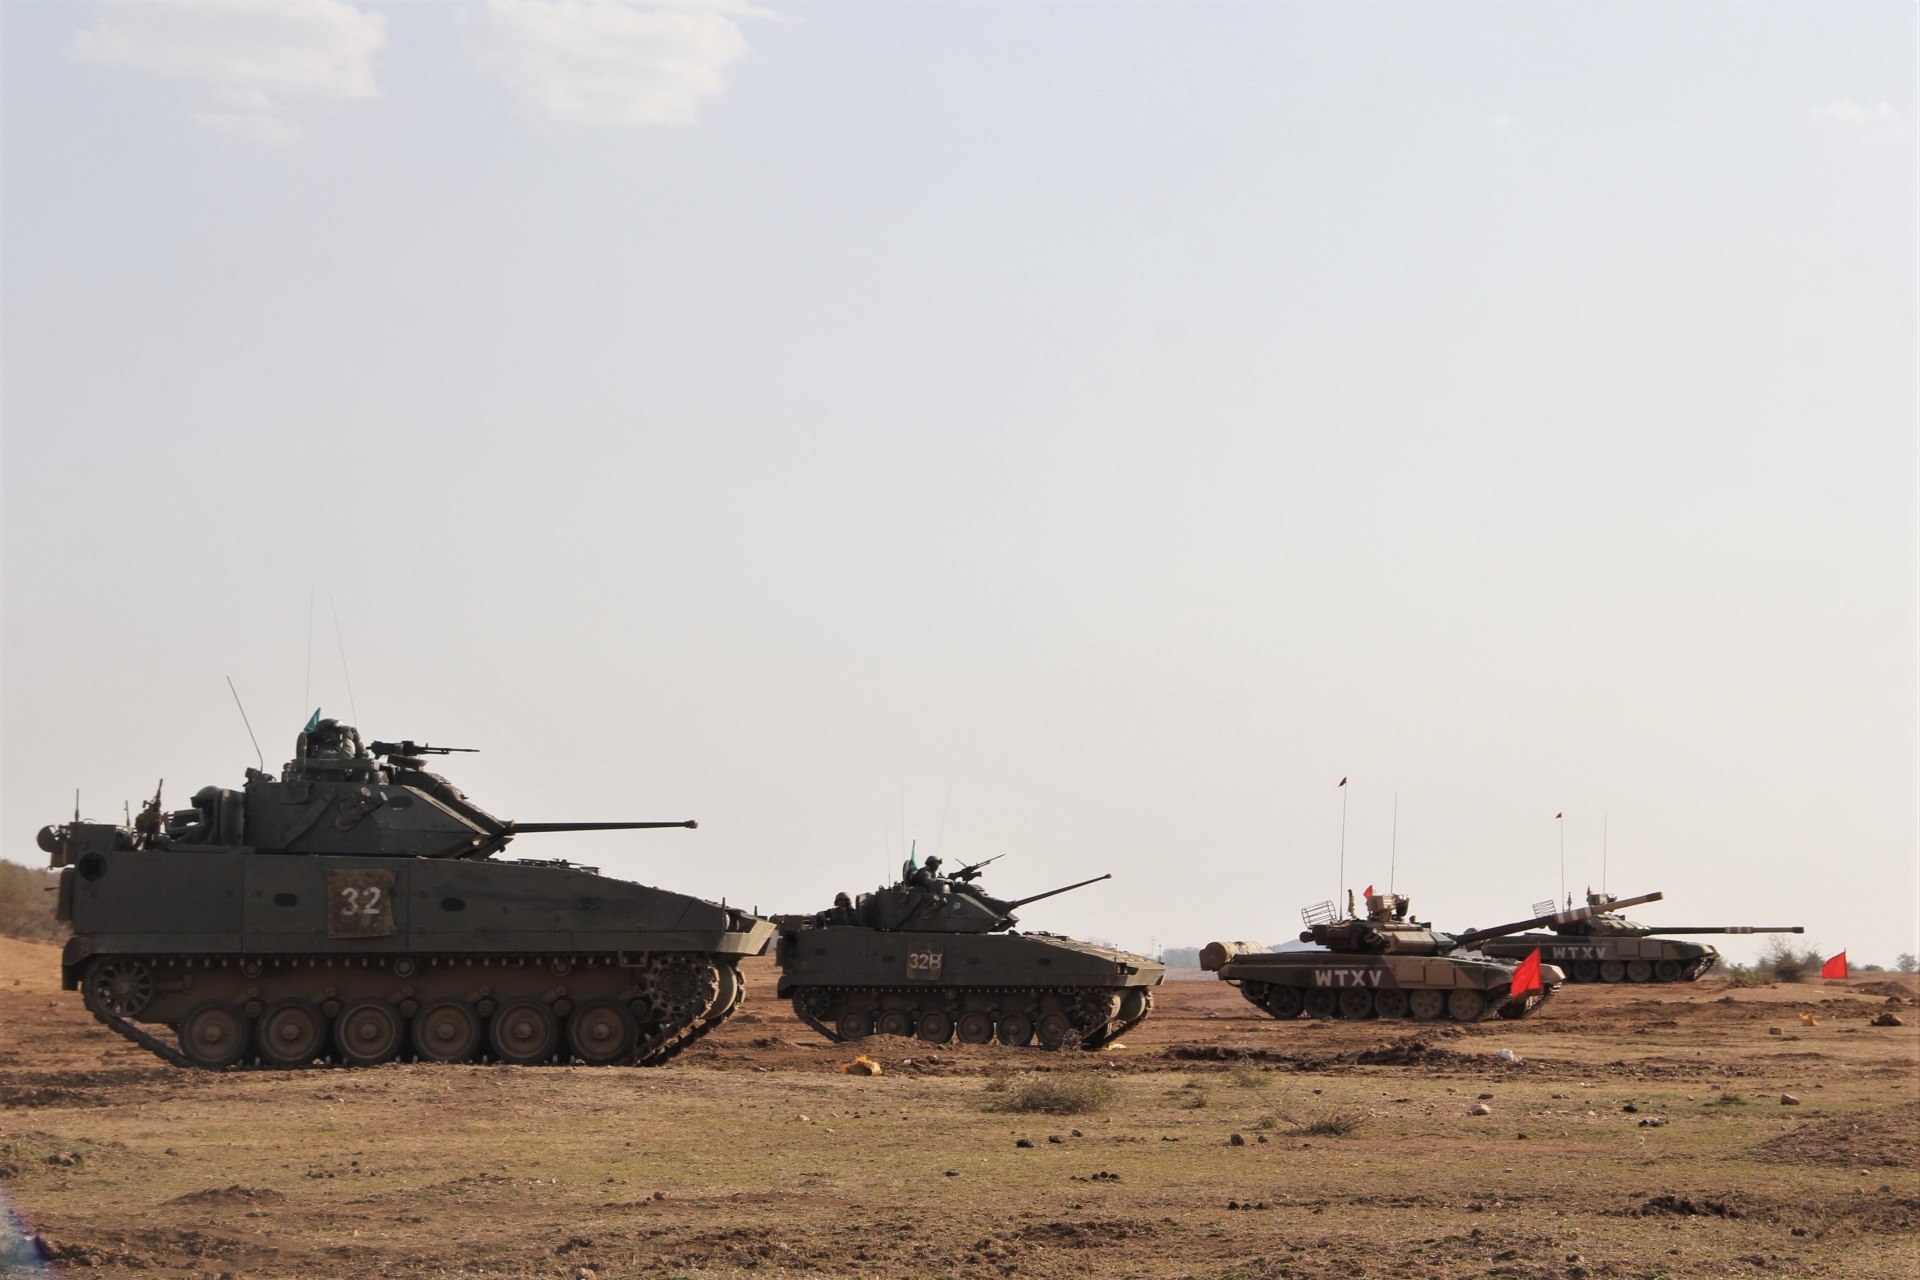 The Singapore Army's Infantry Fighting Vehicles and Indian Army's Main Battle Tanks during the integrated live-firing at Exercise Bold Kurukshetra.